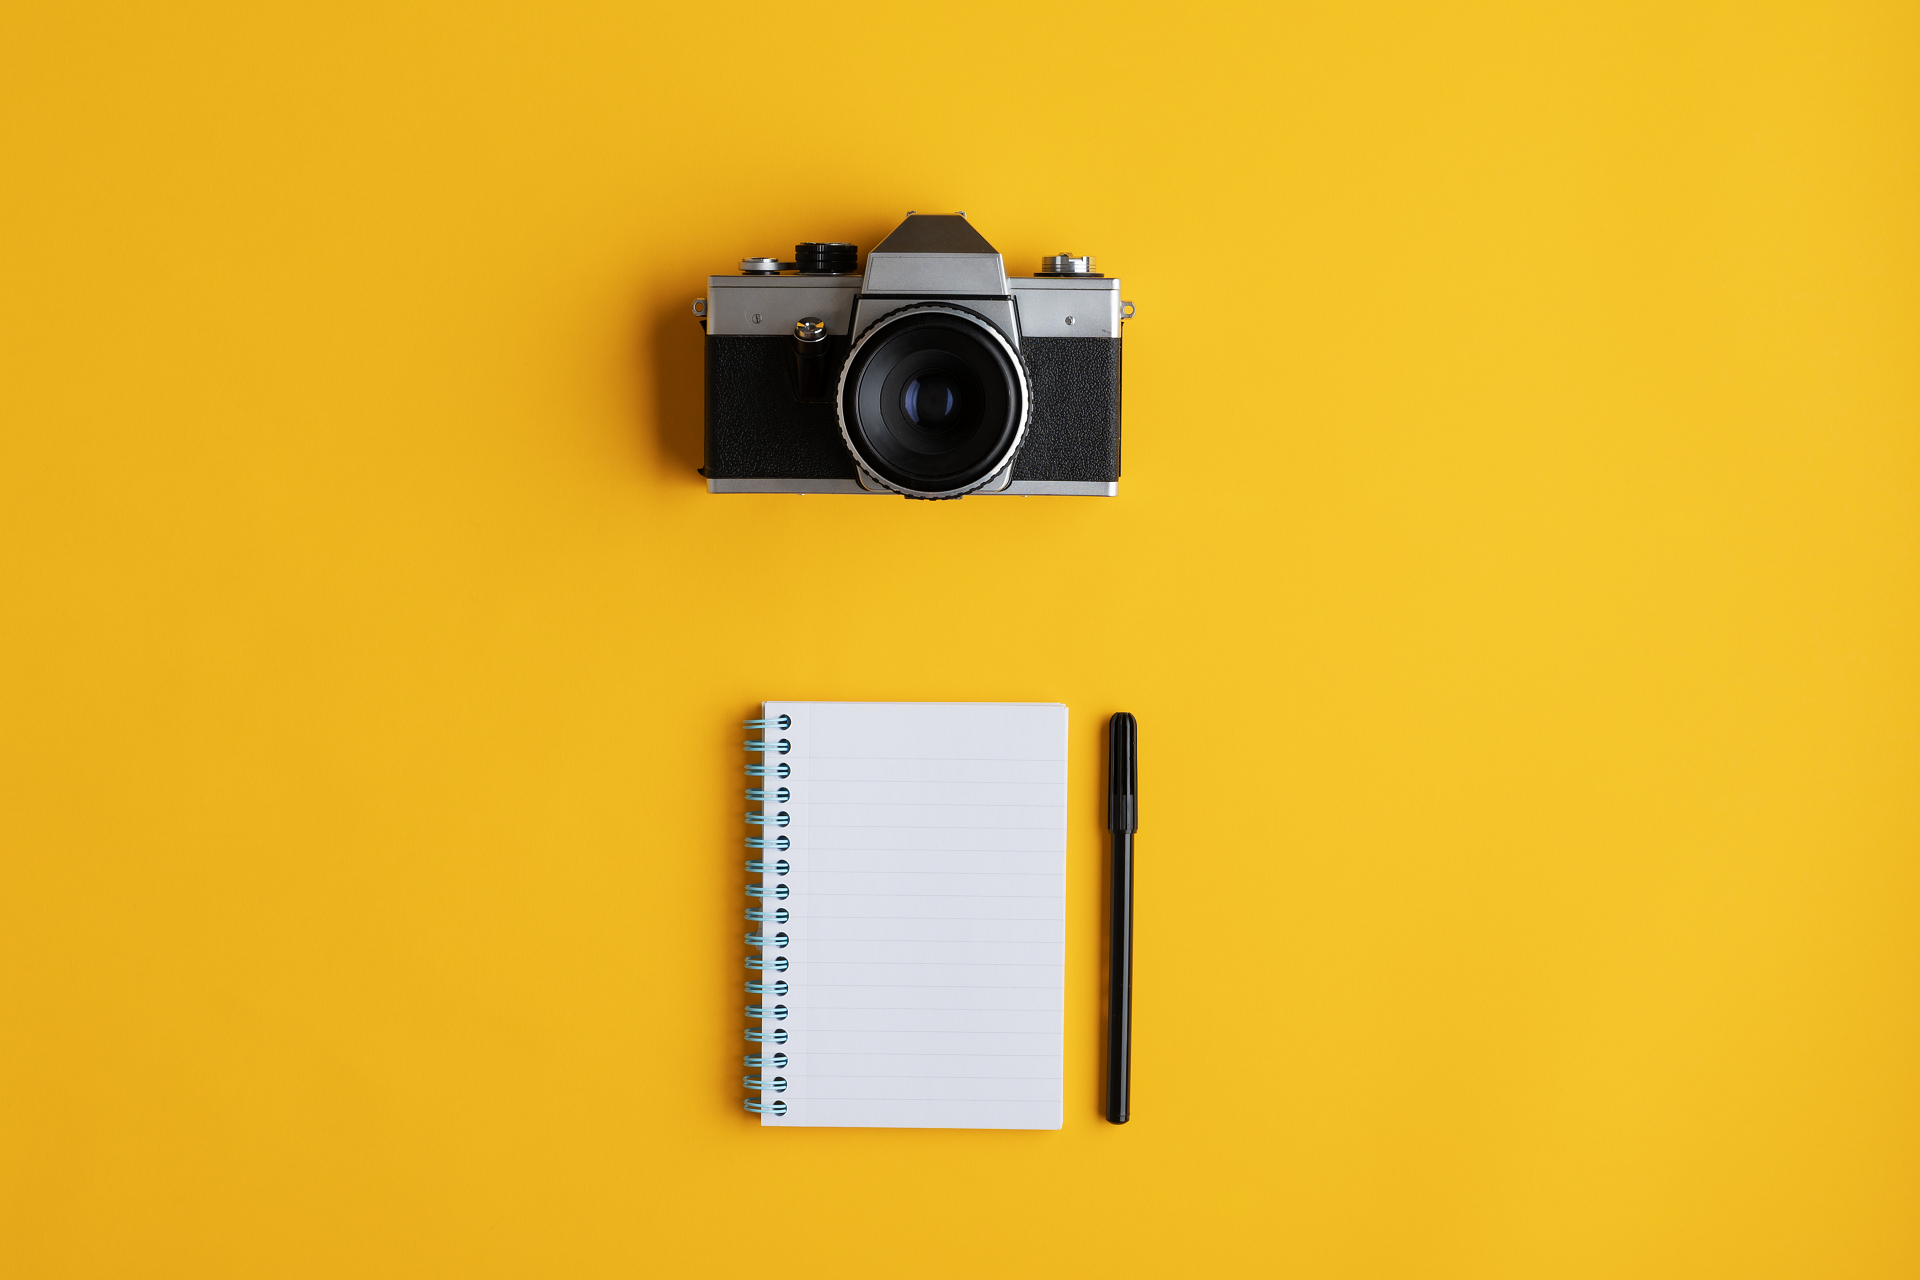 An image of a camera and a notepad on yellow background.